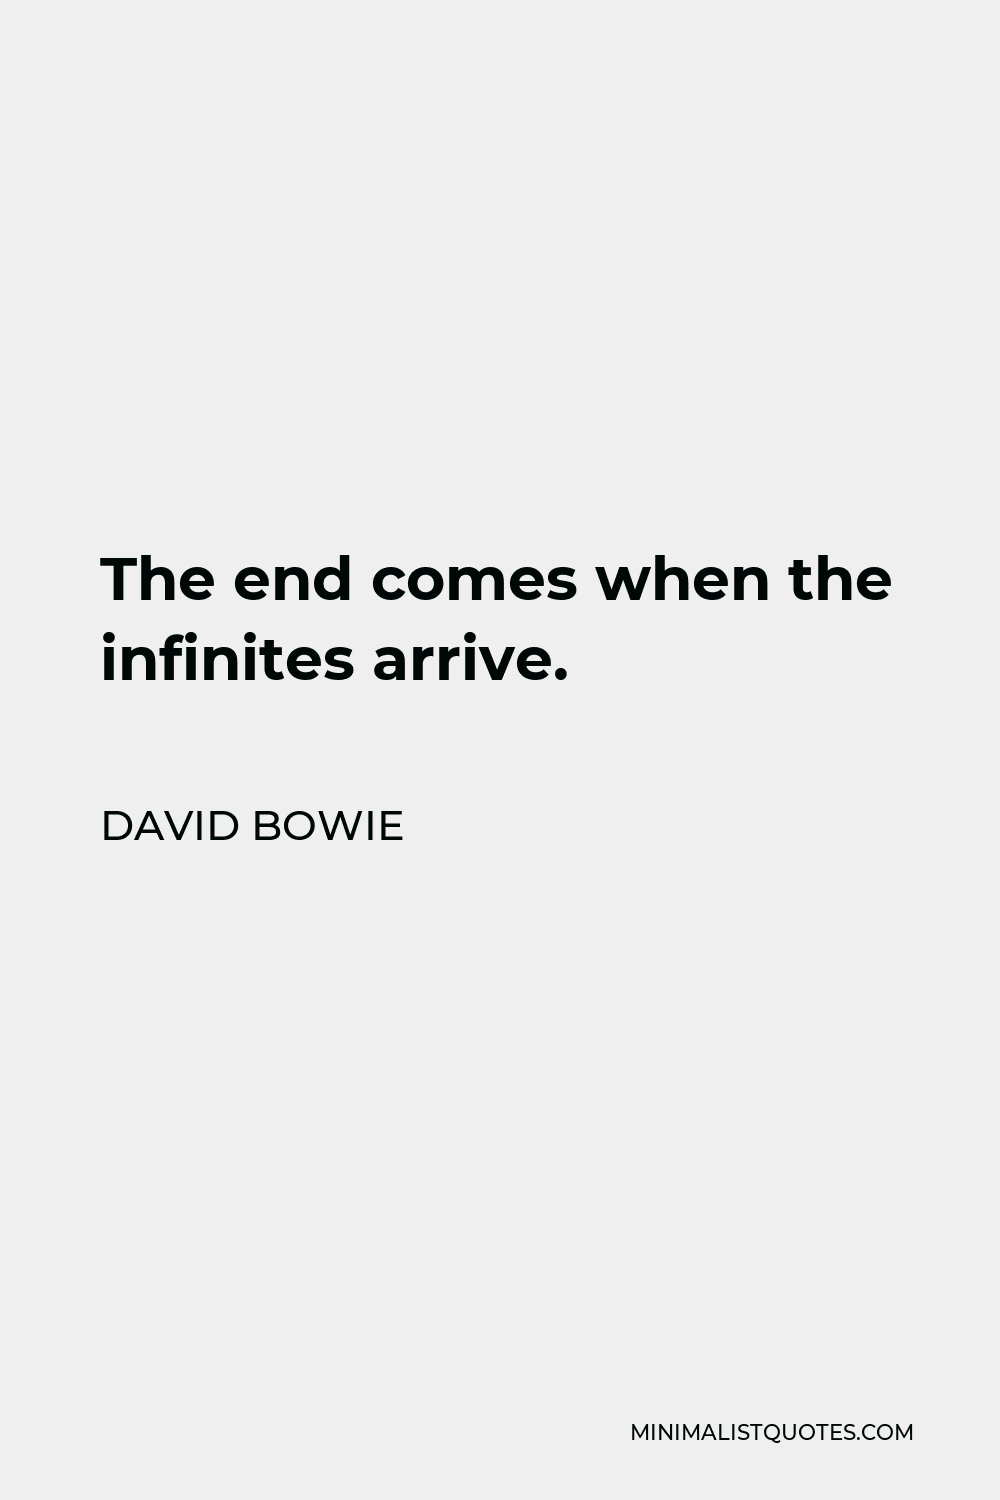 David Bowie Quote - The end comes when the infinites arrive.